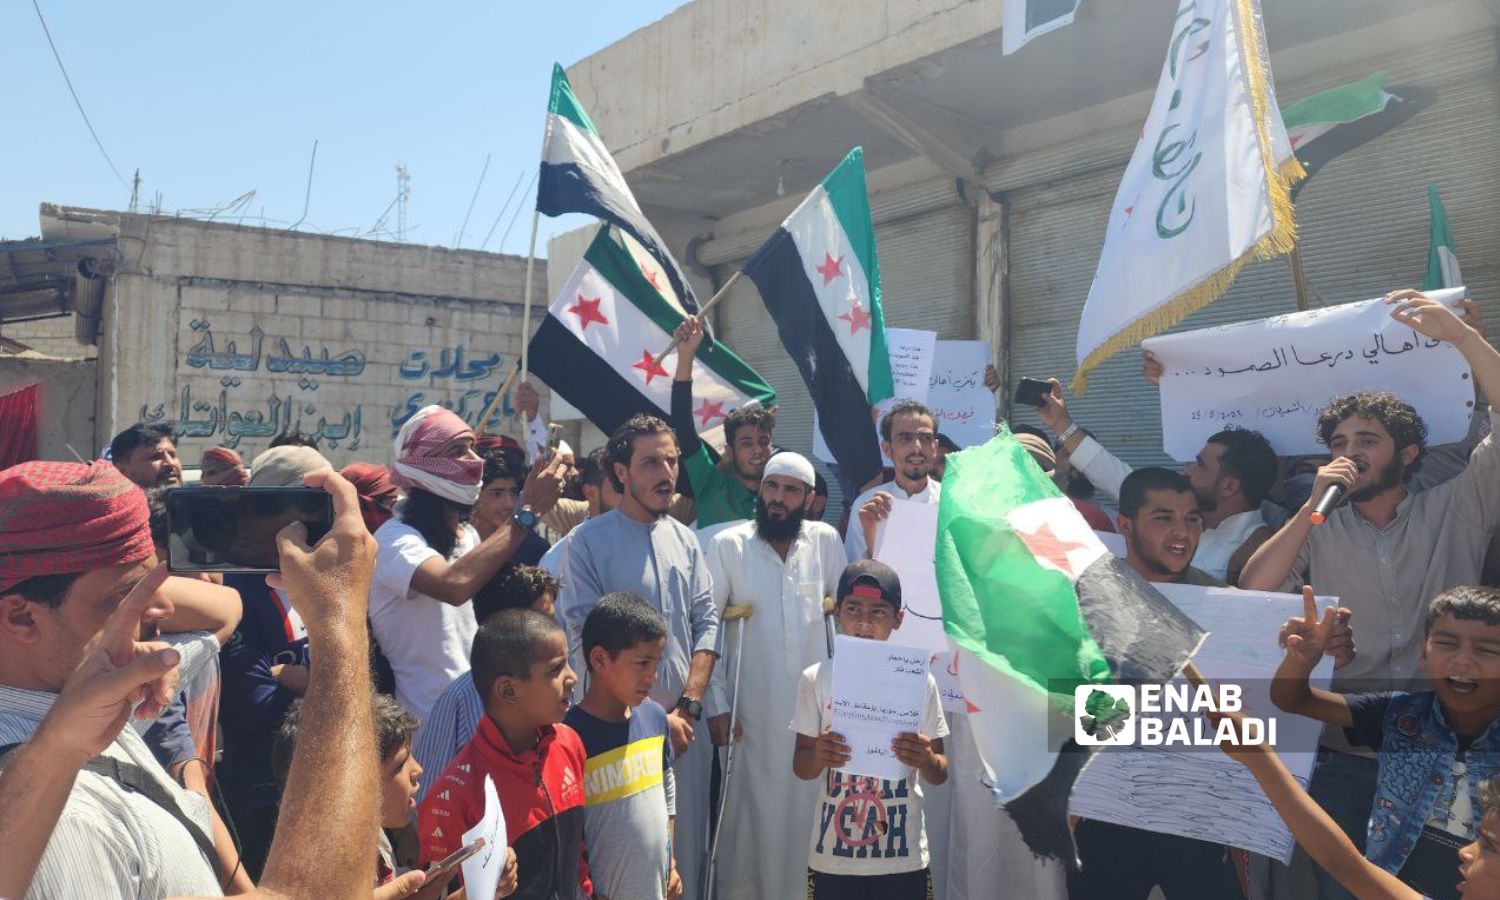 In solidarity with the people of As-Suwayda and the Syrian governorates, a demonstration took place in the town of al-Jarthi al-Sharqi in the eastern countryside of Deir Ezzor city, calling for the overthrow of the regime and emphasizing the principles of the Syrian revolution - August 25, 2023 (Enab Baladi/Obadah al-Sheikh)